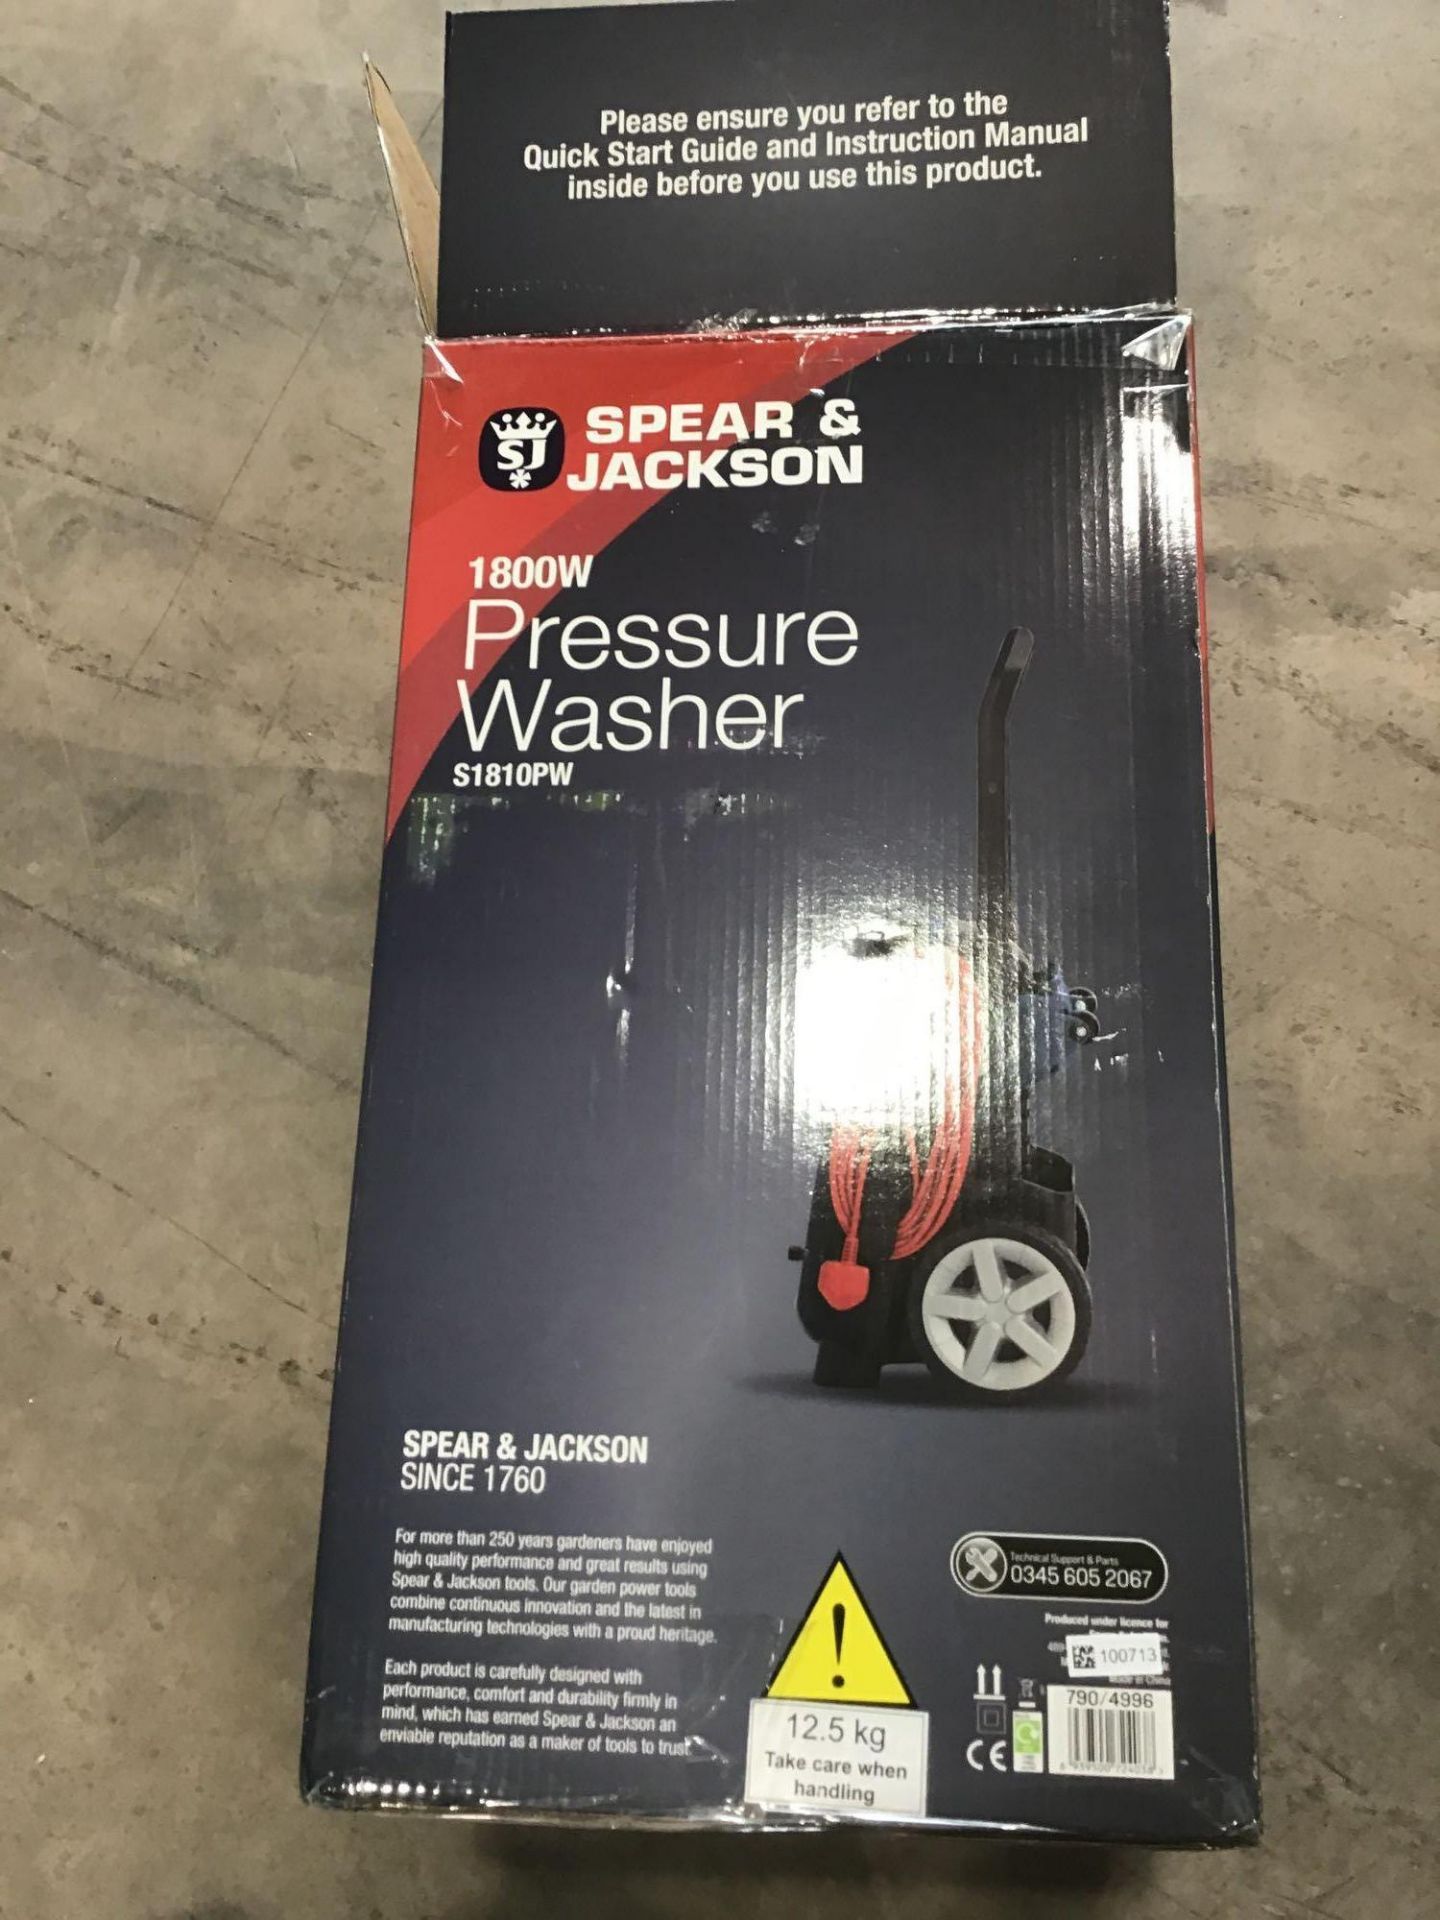 Spear and Jackson S1810PW Pressure Washer - 1800W - £120.00 RRP - Image 2 of 3